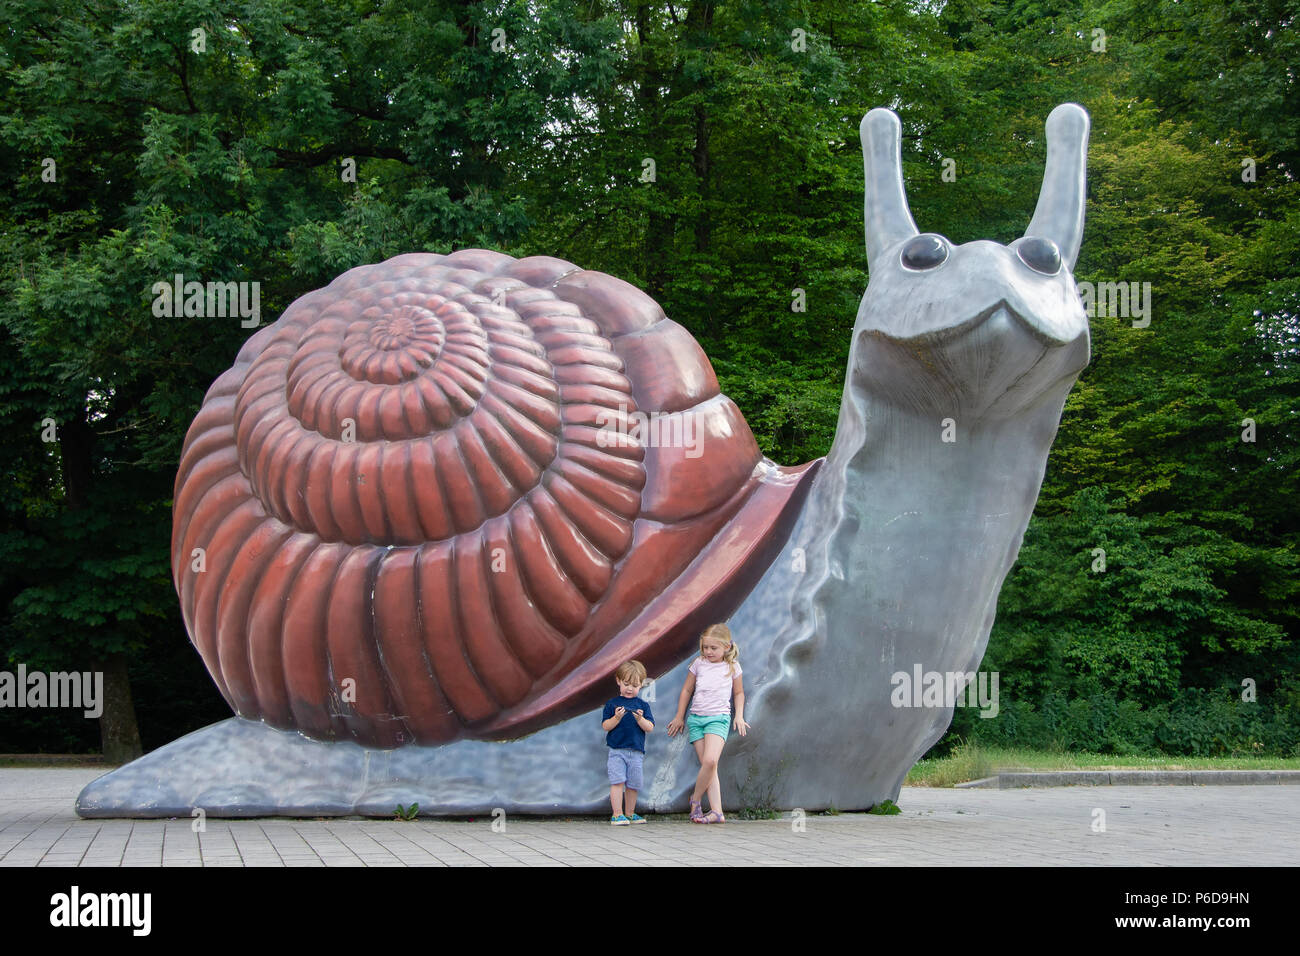 June 21, 2017: The Sweet Brown Snail, the sculpture was designed in 2002 by Jason Rhoades and Paul McCarthy and is located in Munich, Germany Stock Photo